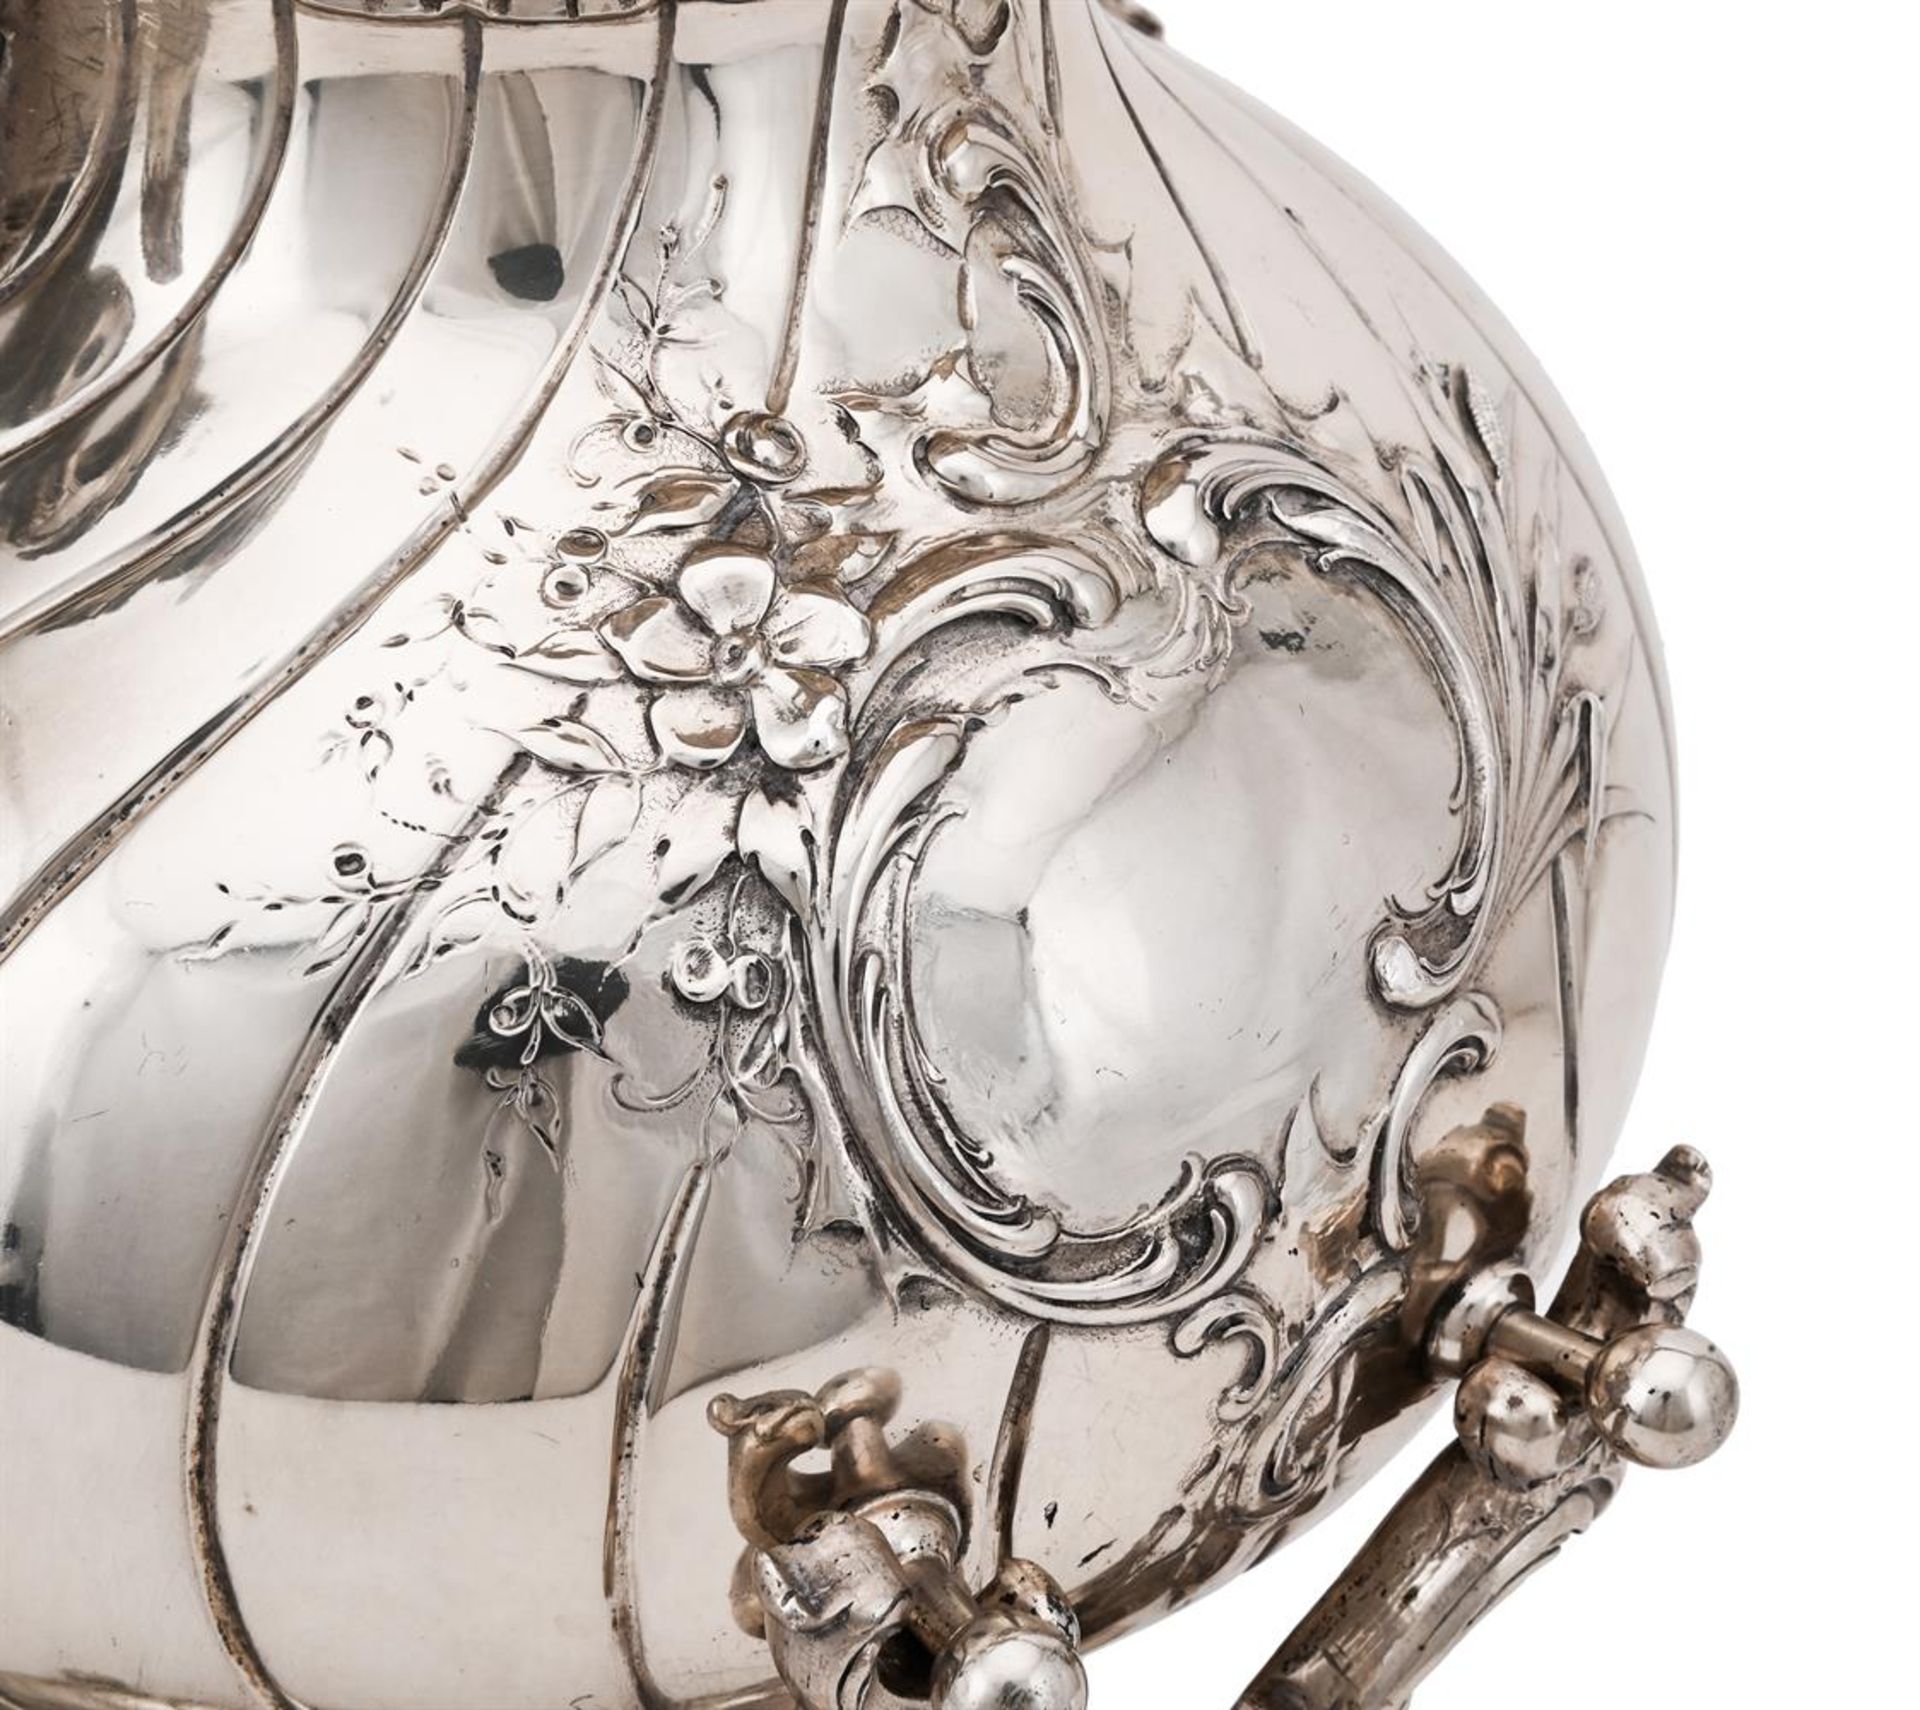 A GERMAN SILVER BALUSTER KETTLE ON AN ASSOCIATED SILVER STAND - Image 2 of 3